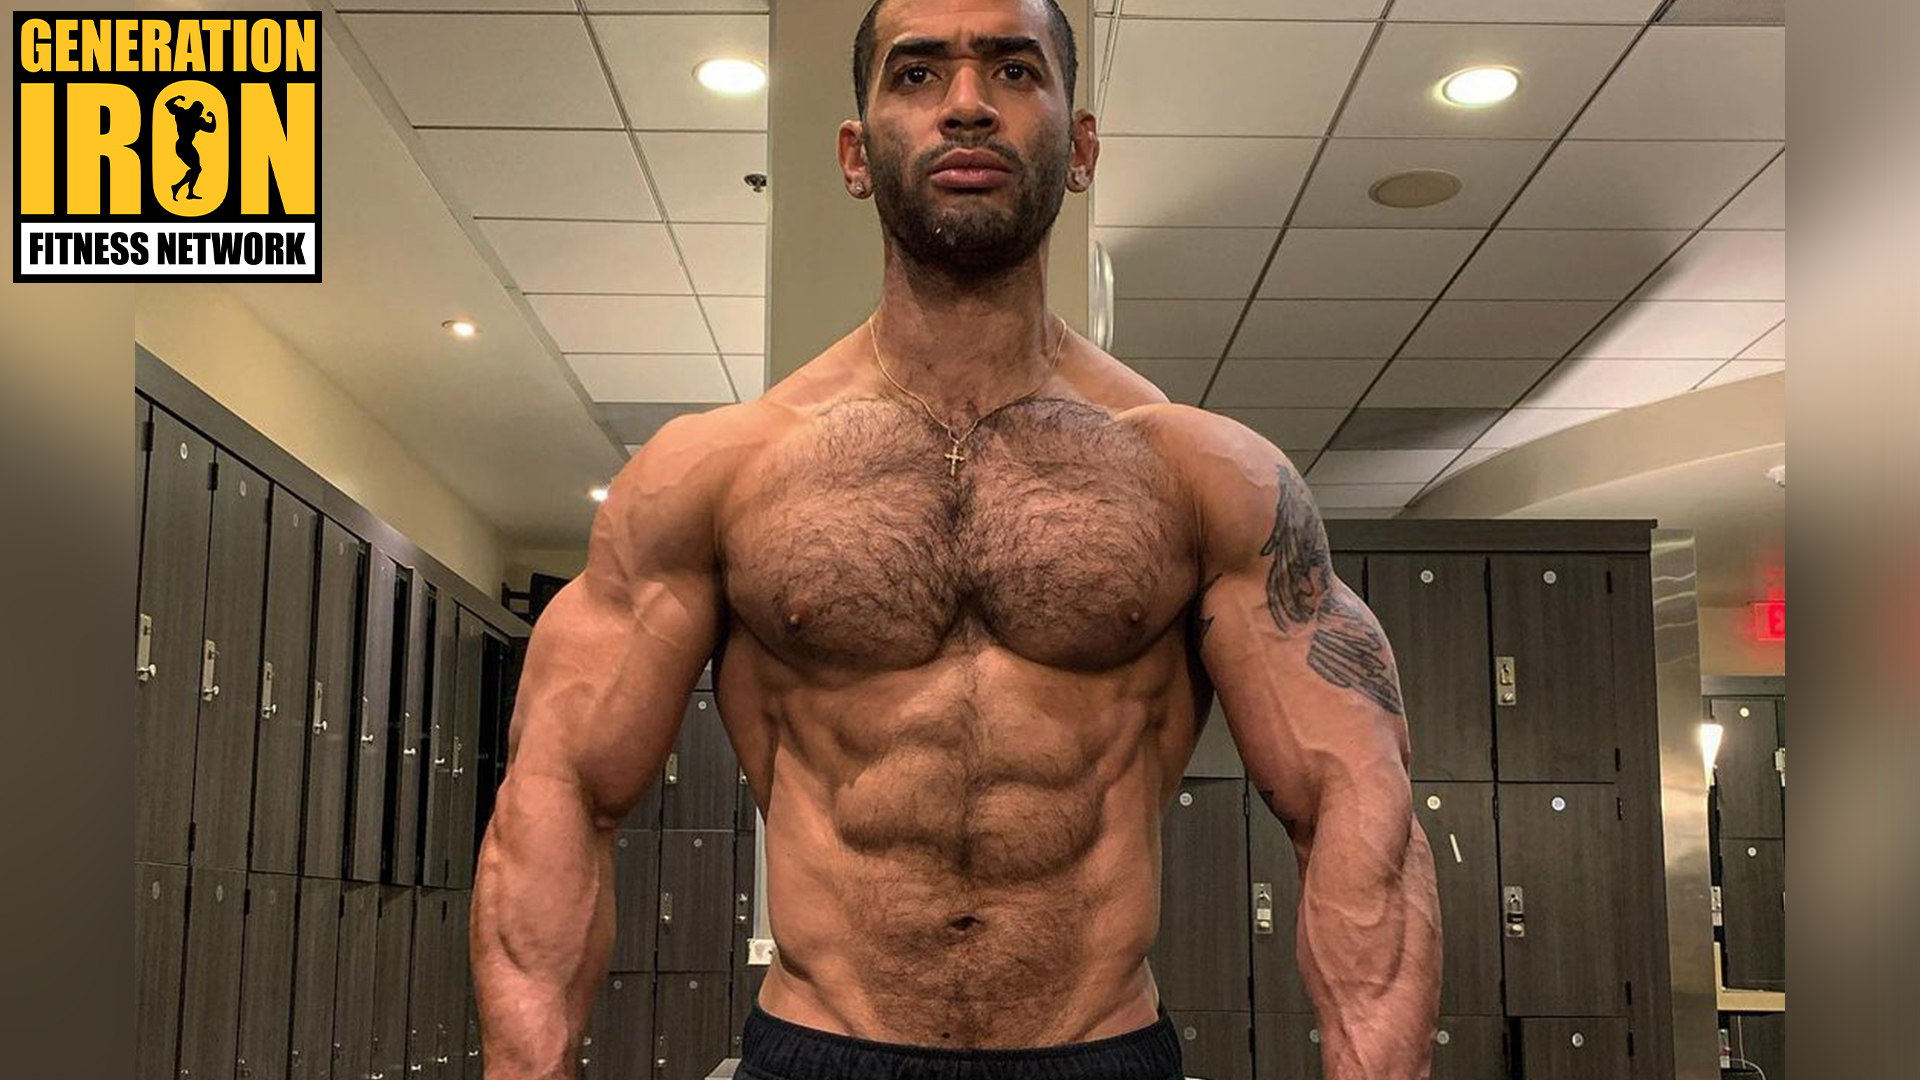 Jamie LeRoyce McTizic: I Was To Change Humanity As An All Natural IFBB Pro Champion